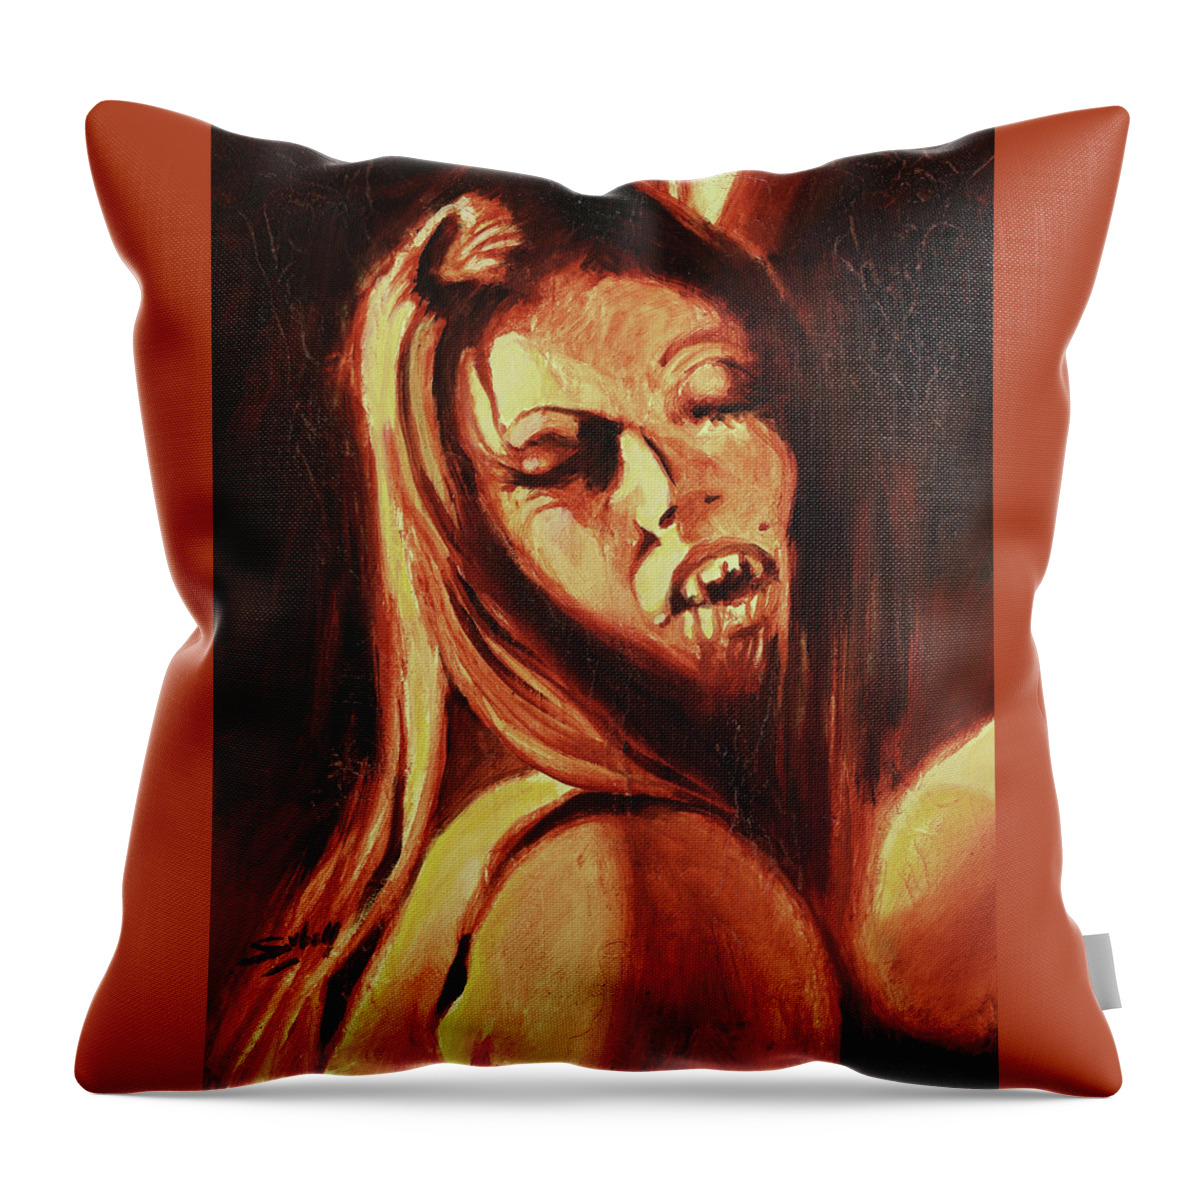 Vampire Throw Pillow featuring the painting The Vampire Lover by Sv Bell